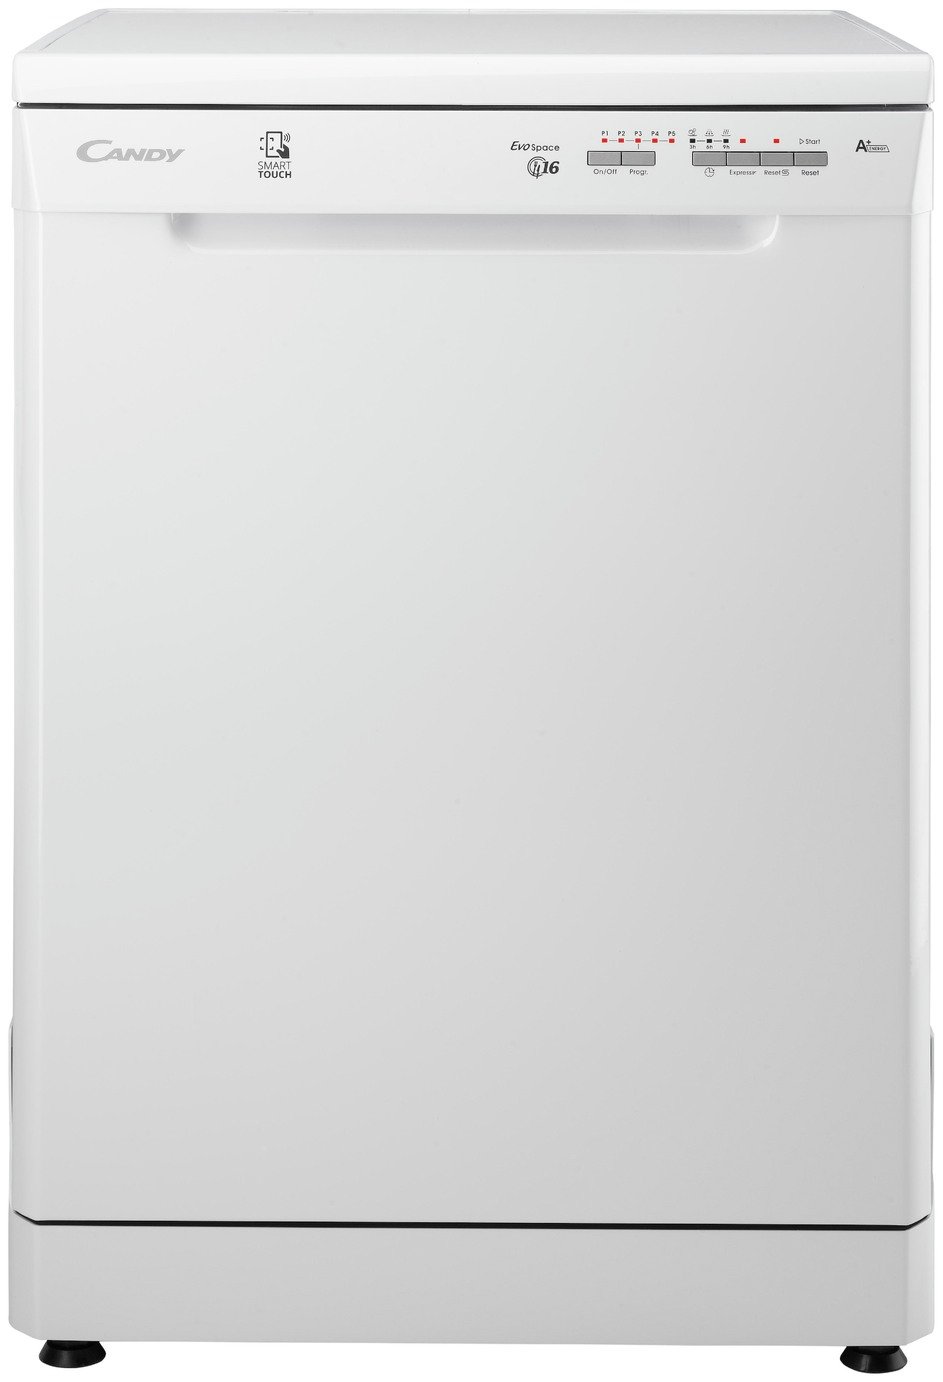 Candy CDPN 1L670SW 16 Place Full Size Dishwasher - White